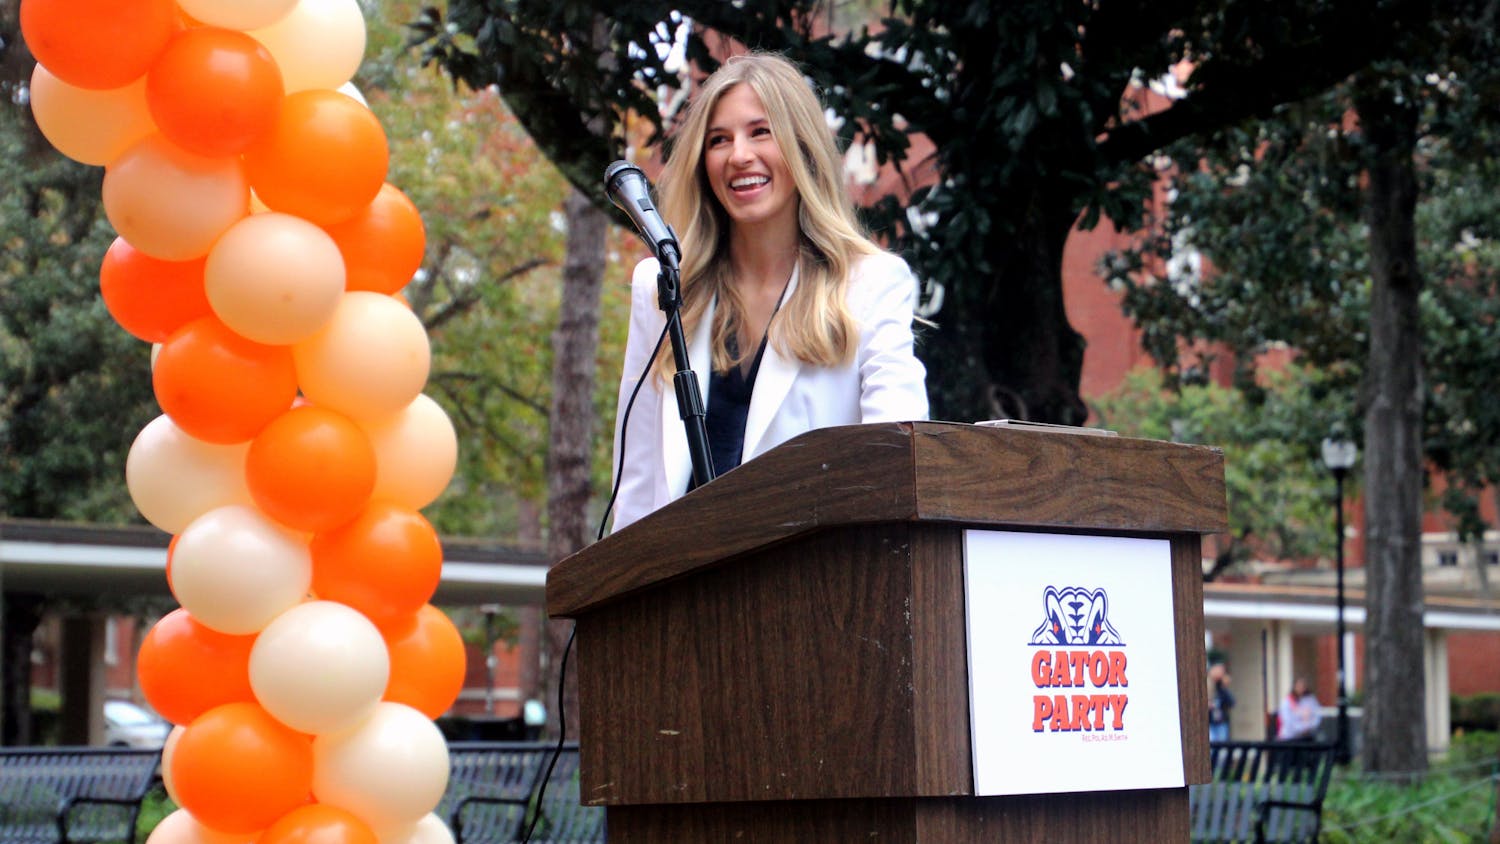 Lauren Lemasters, Gator Party's nominee for Student Government president, walks up to the podium outside of Library West at the announcement of the party's executive ticket on Wednesday, Jan. 26.